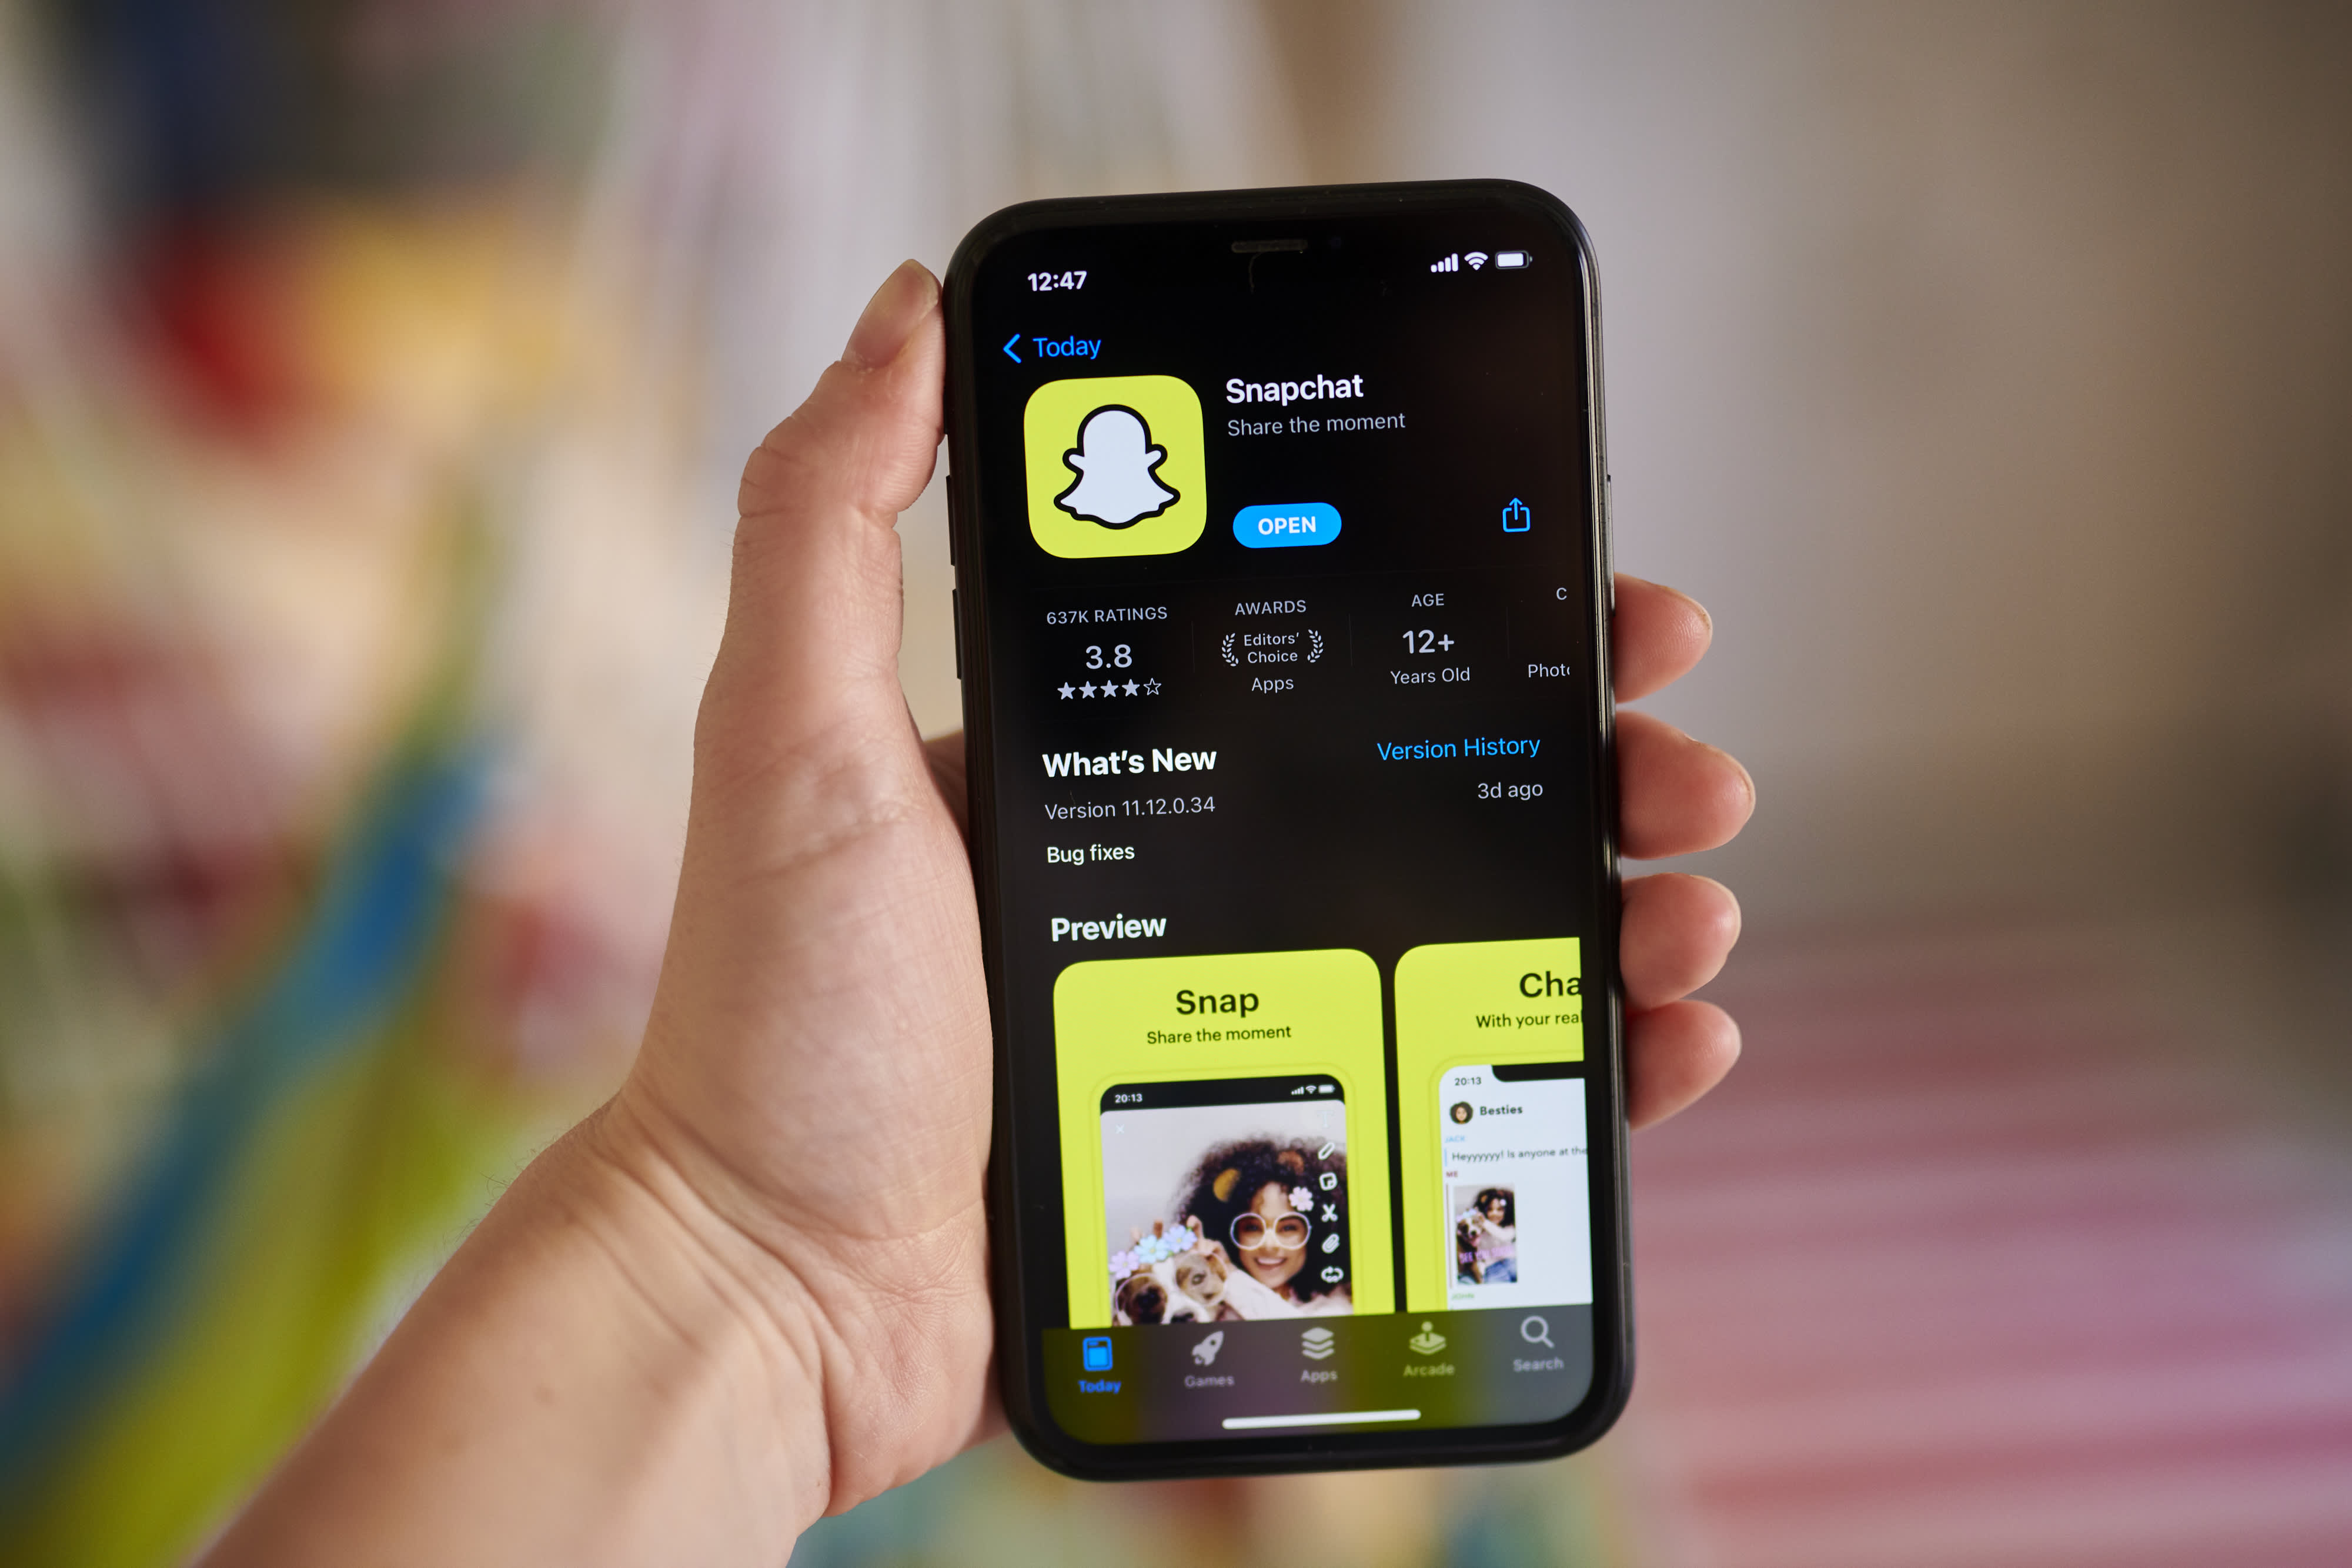 NBA to Play Key Role in Snap’s 50% Revenue Growth